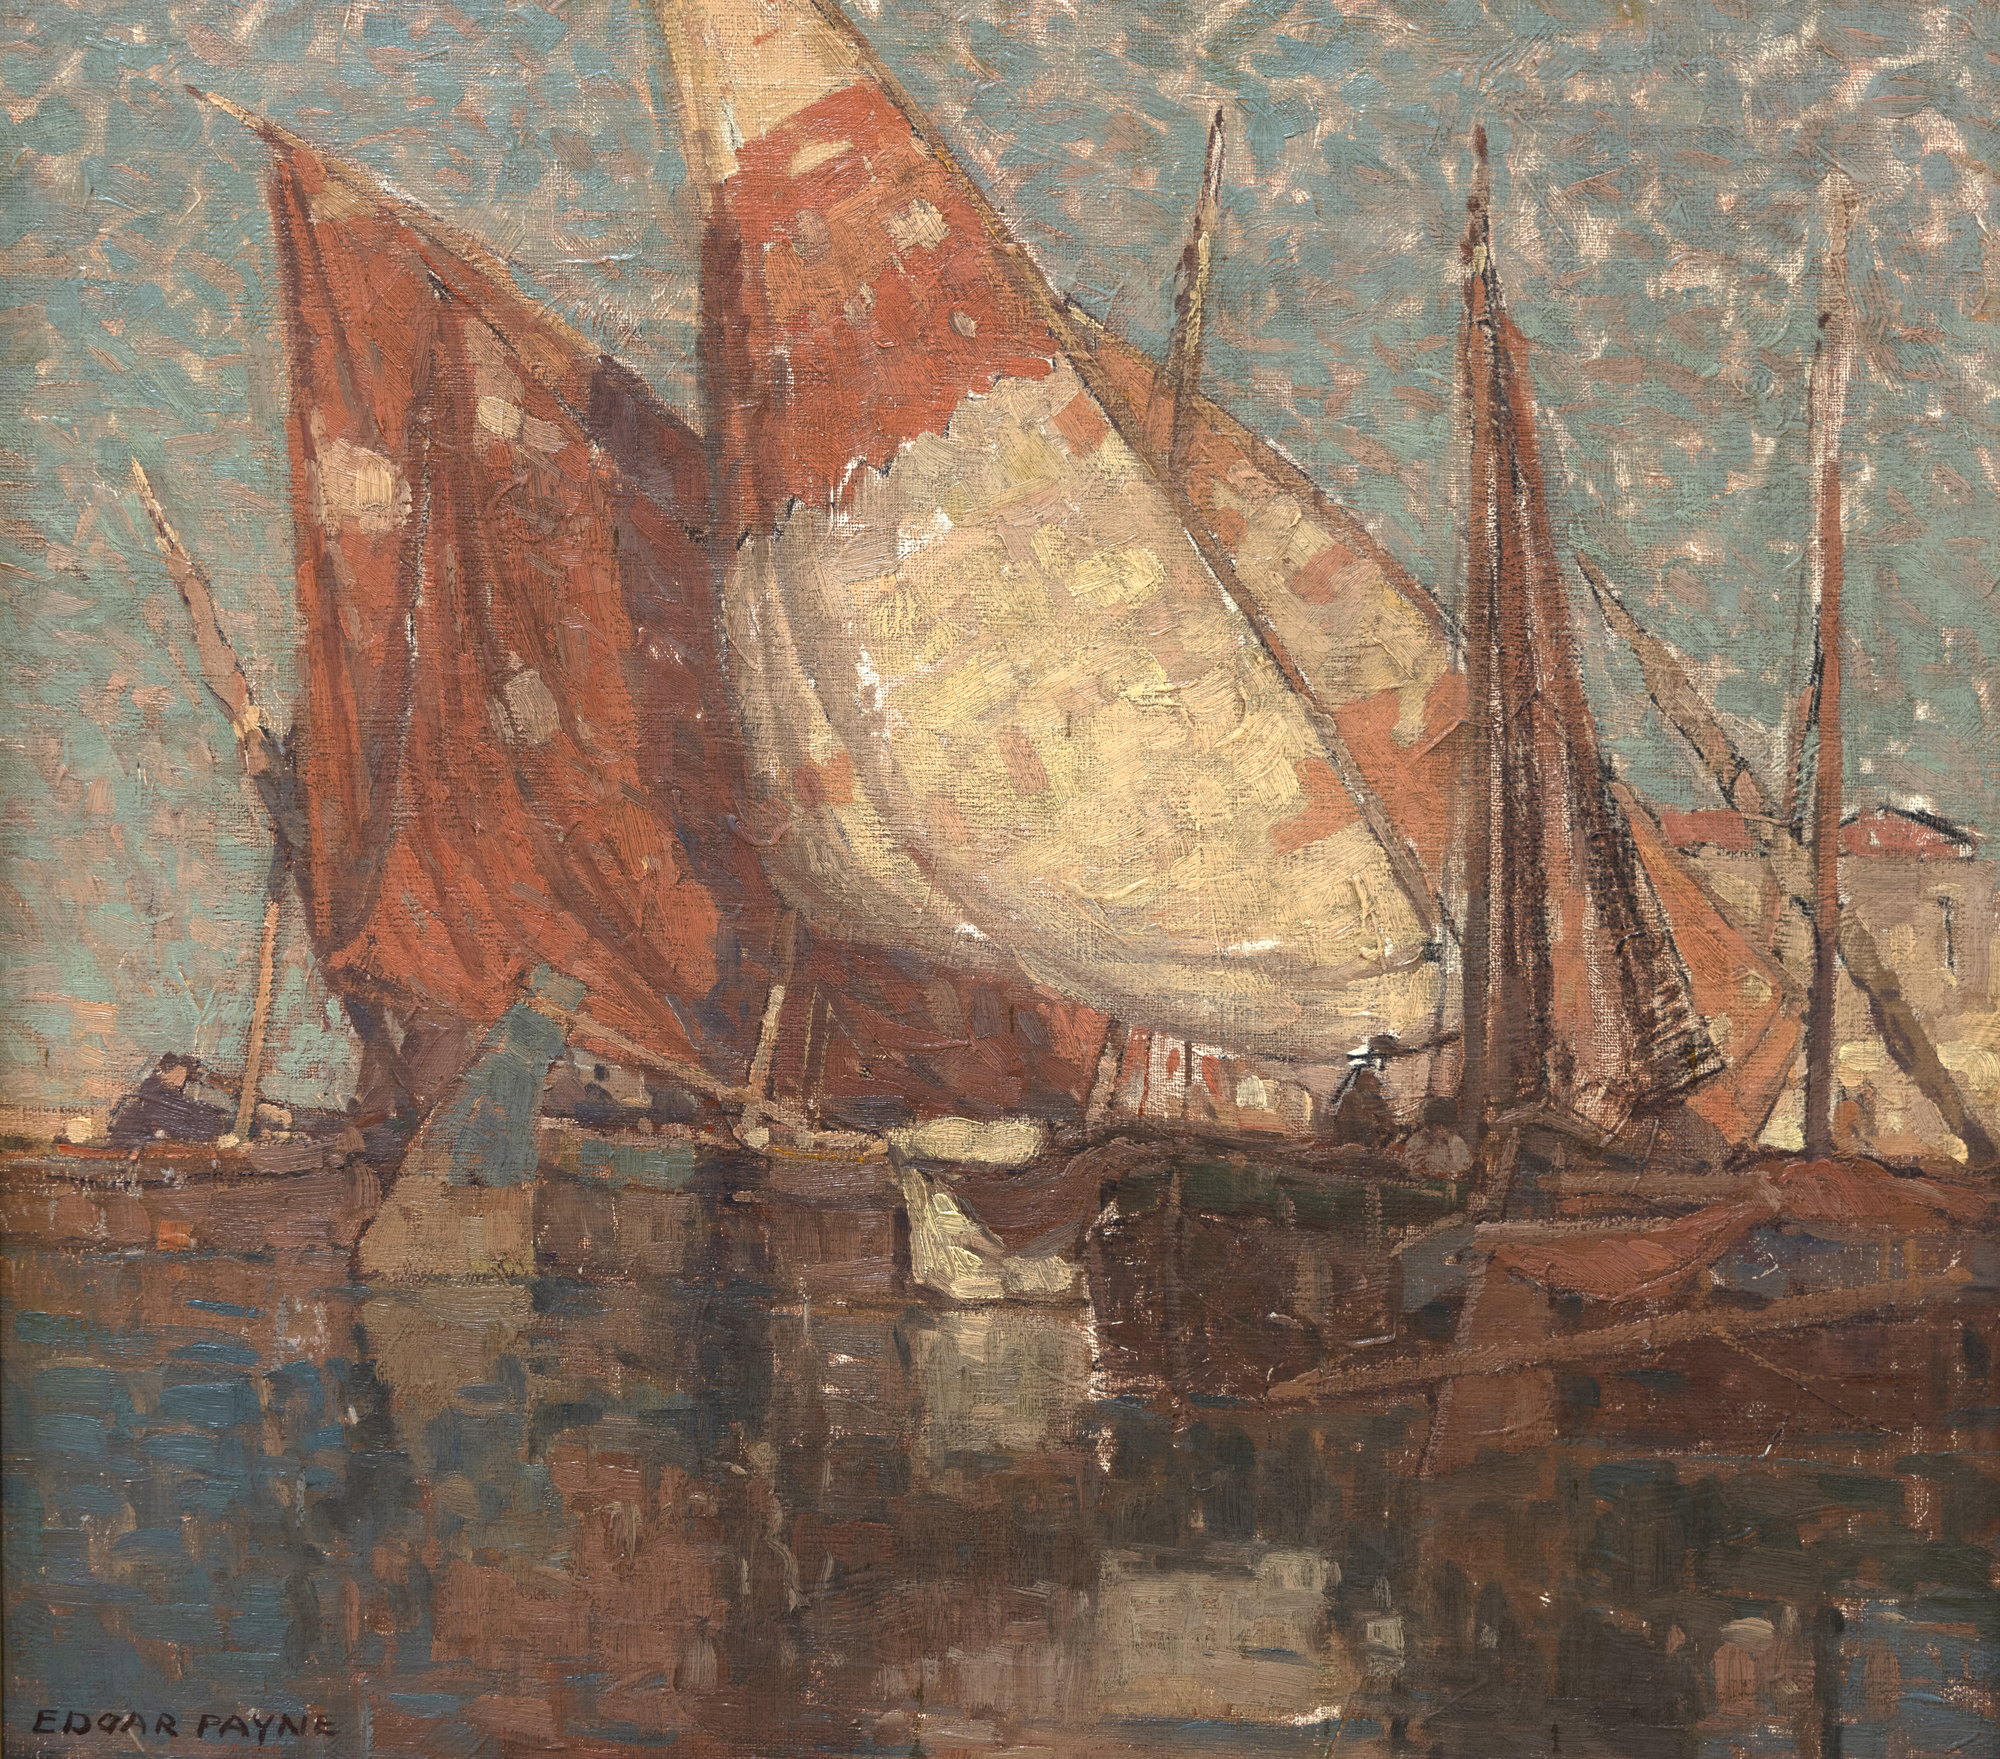 EDGAR ALWIN PAYNE - Venetian Boats at Sotto Marino - oil on panel - 23 3/8 x 26 1/4 in.